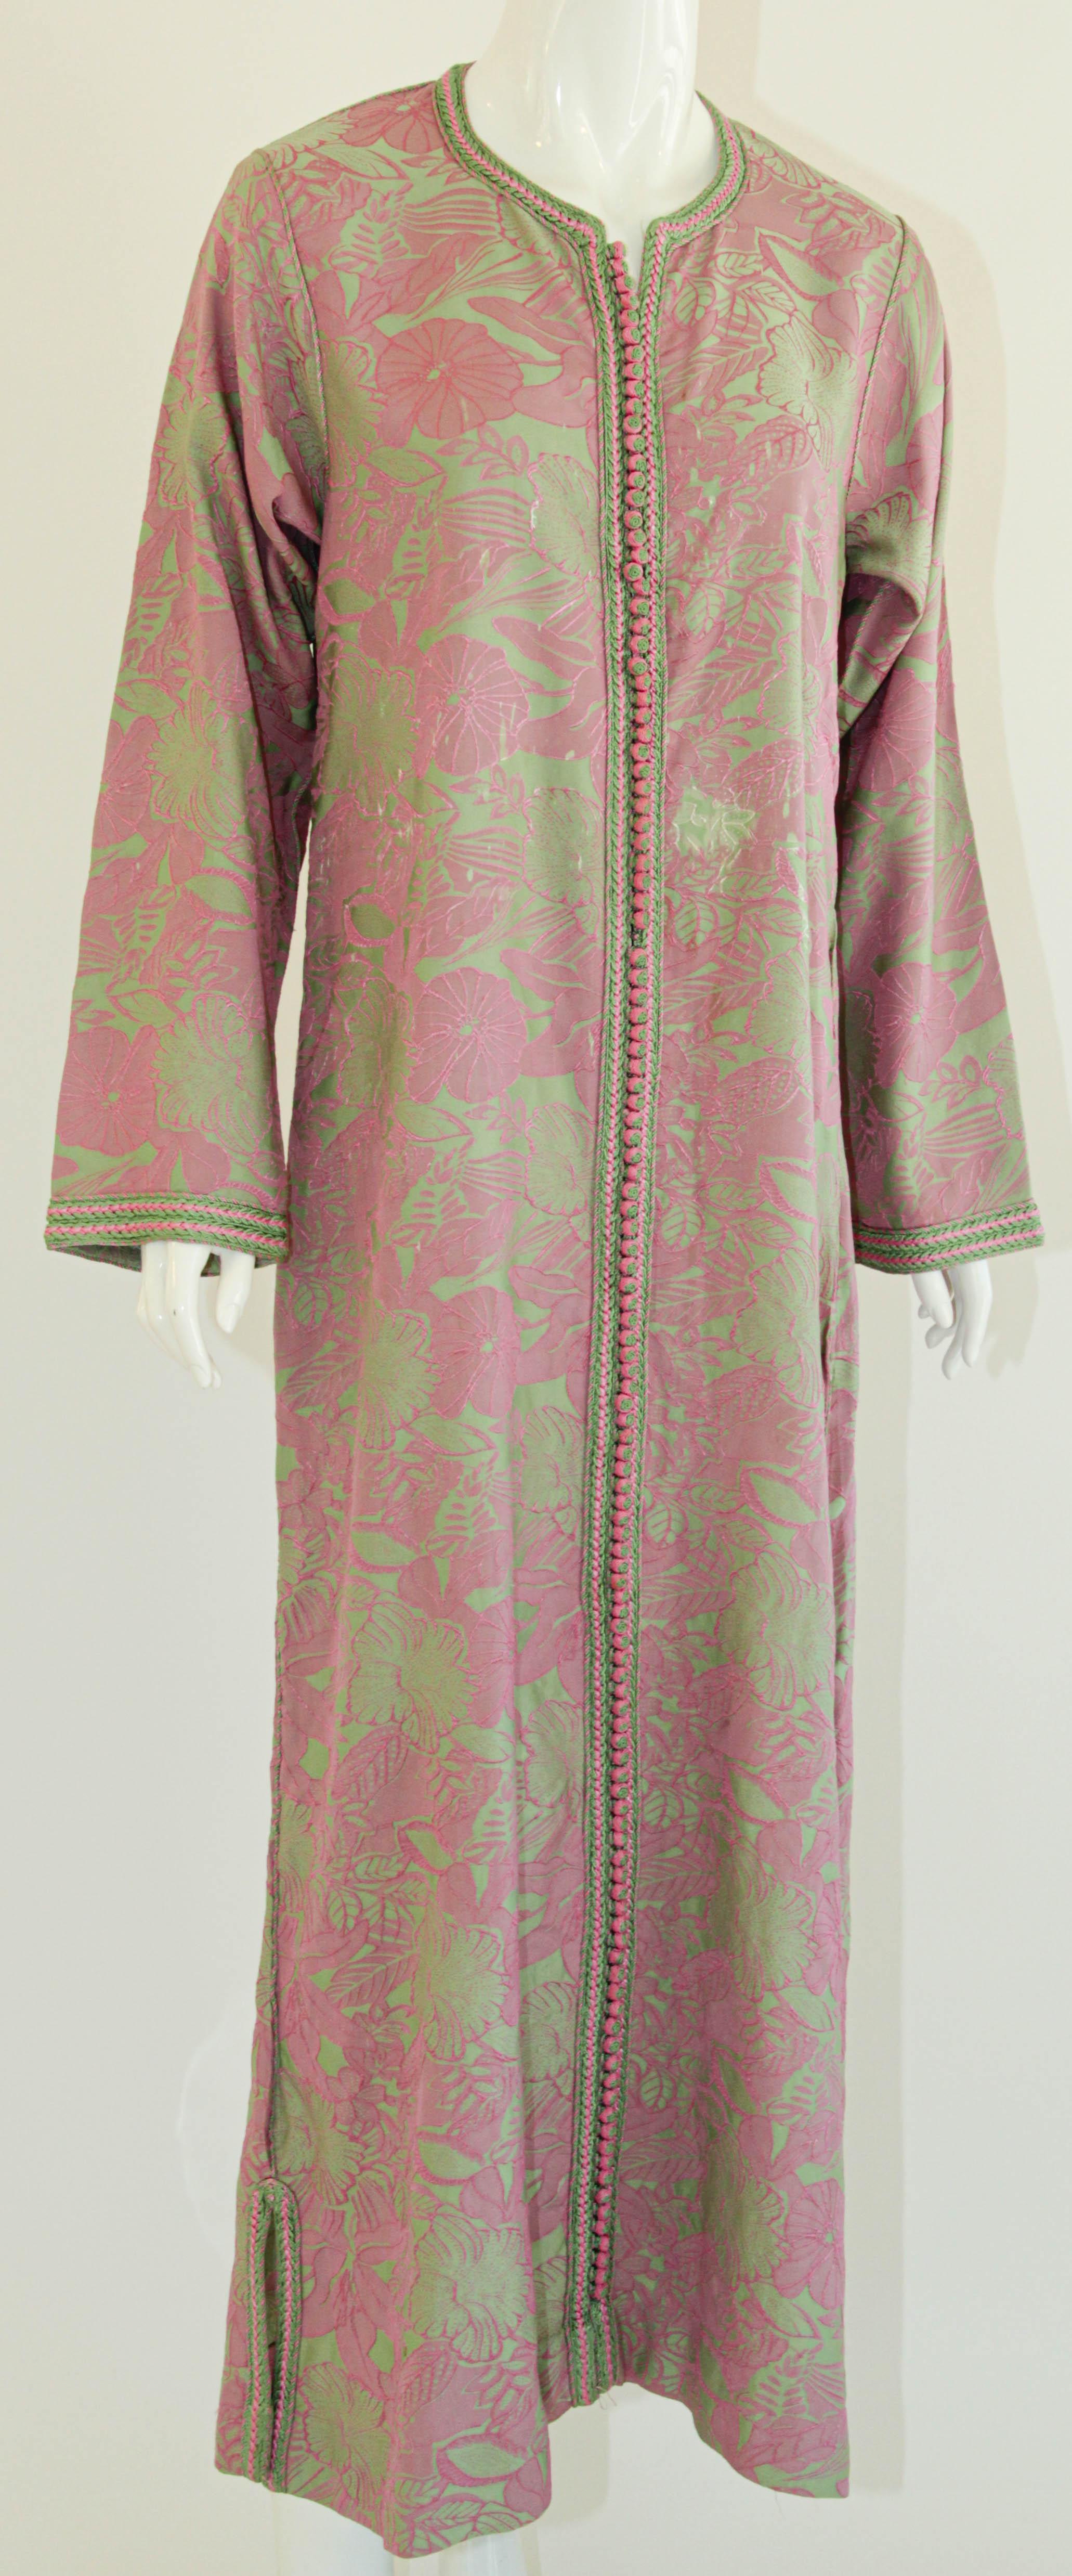 Moroccan Vintage Caftan Pink and Green Trim For Sale 2